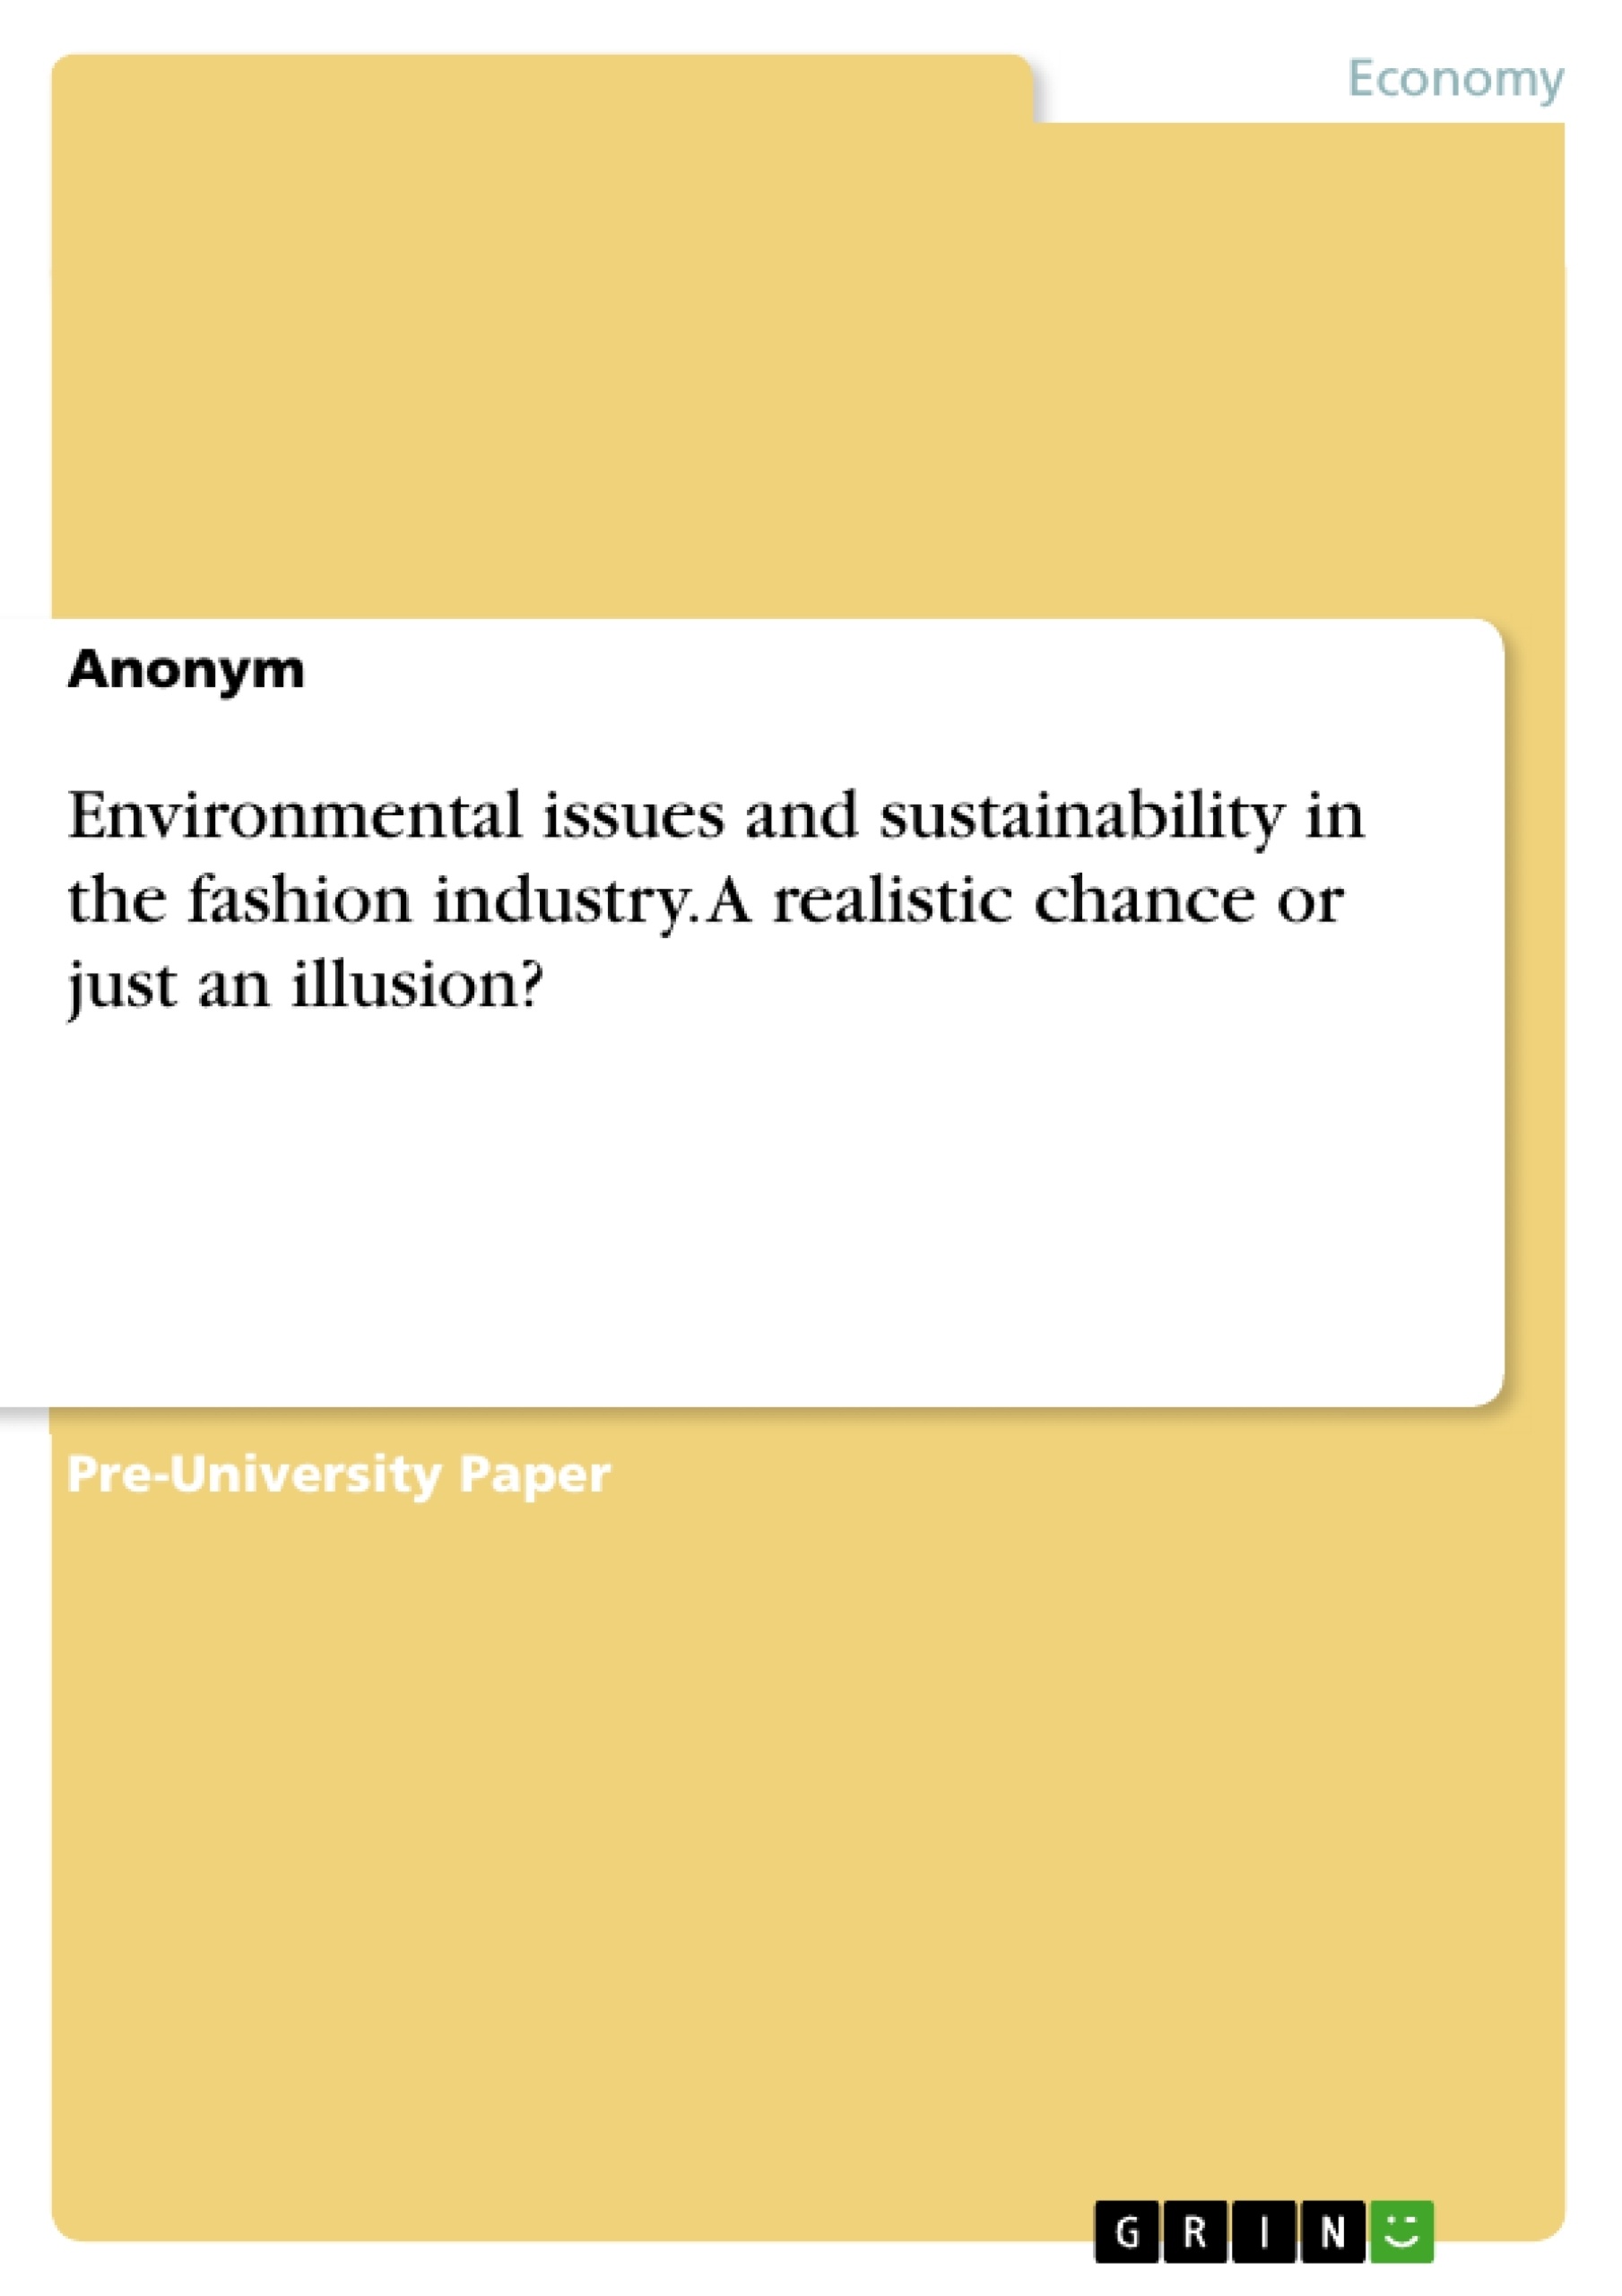 Title: Environmental issues and sustainability in the fashion industry. A realistic chance or just an illusion?